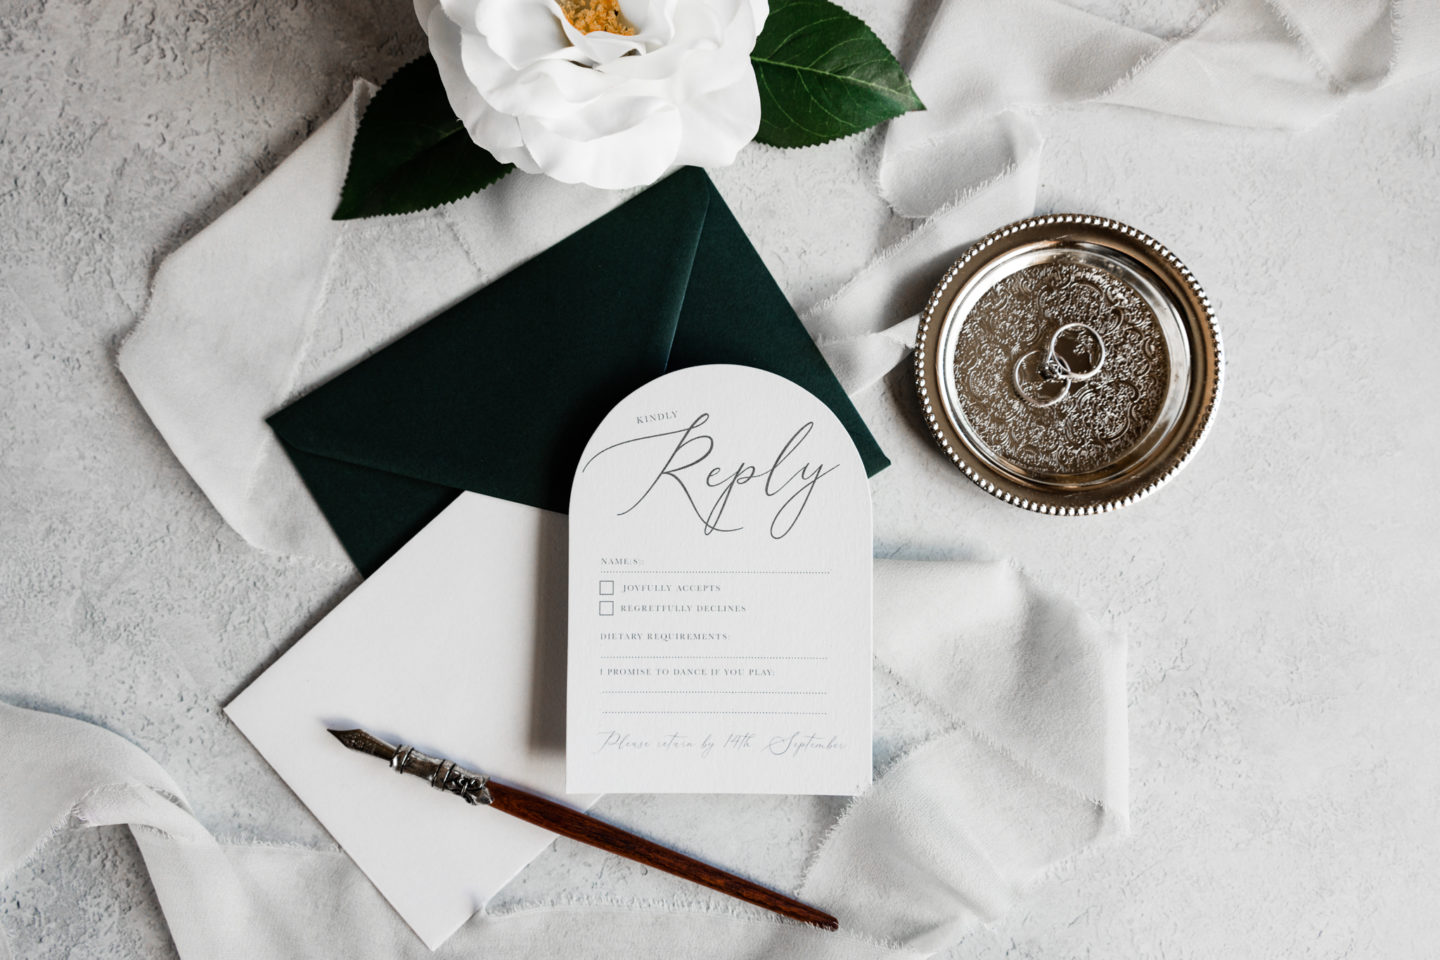 10 Mistakes To Avoid When Sending Your Wedding Invitations